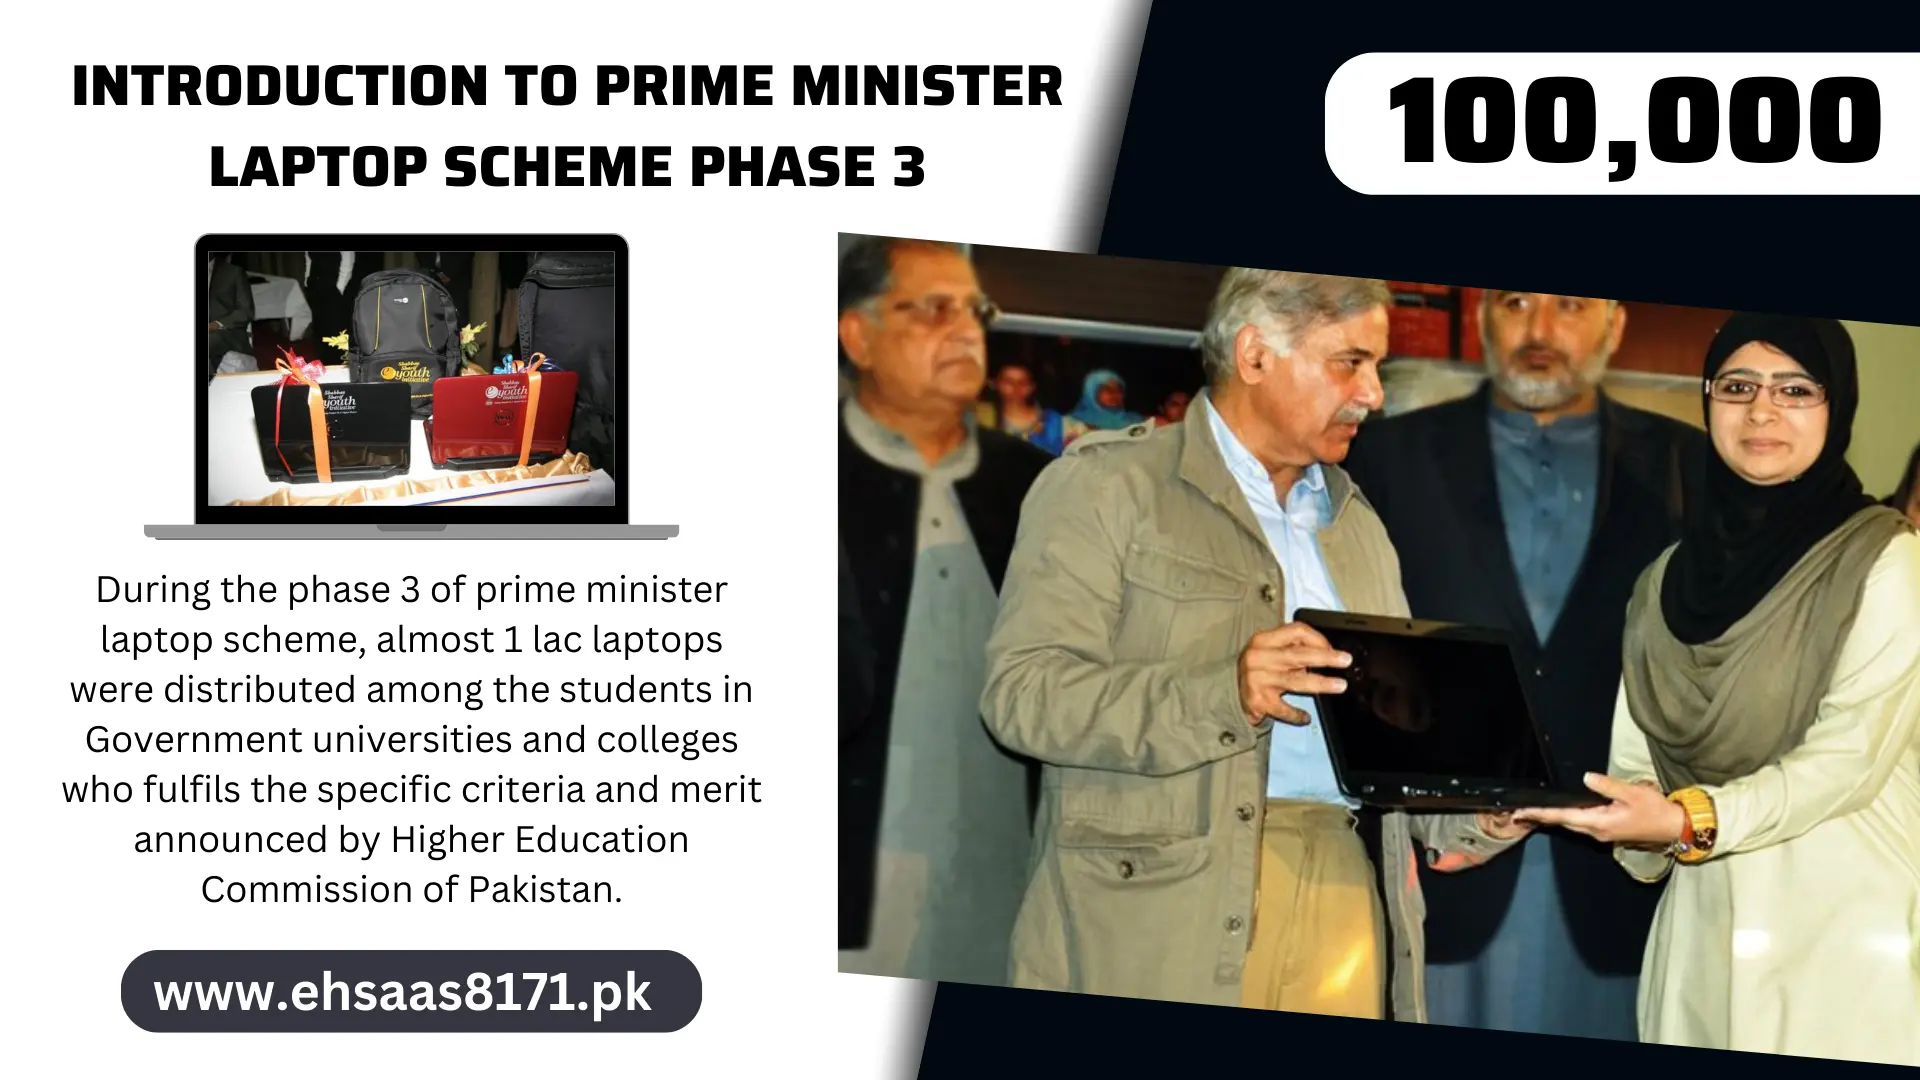 Introduction to Prime Minister Laptop Scheme Phase 3